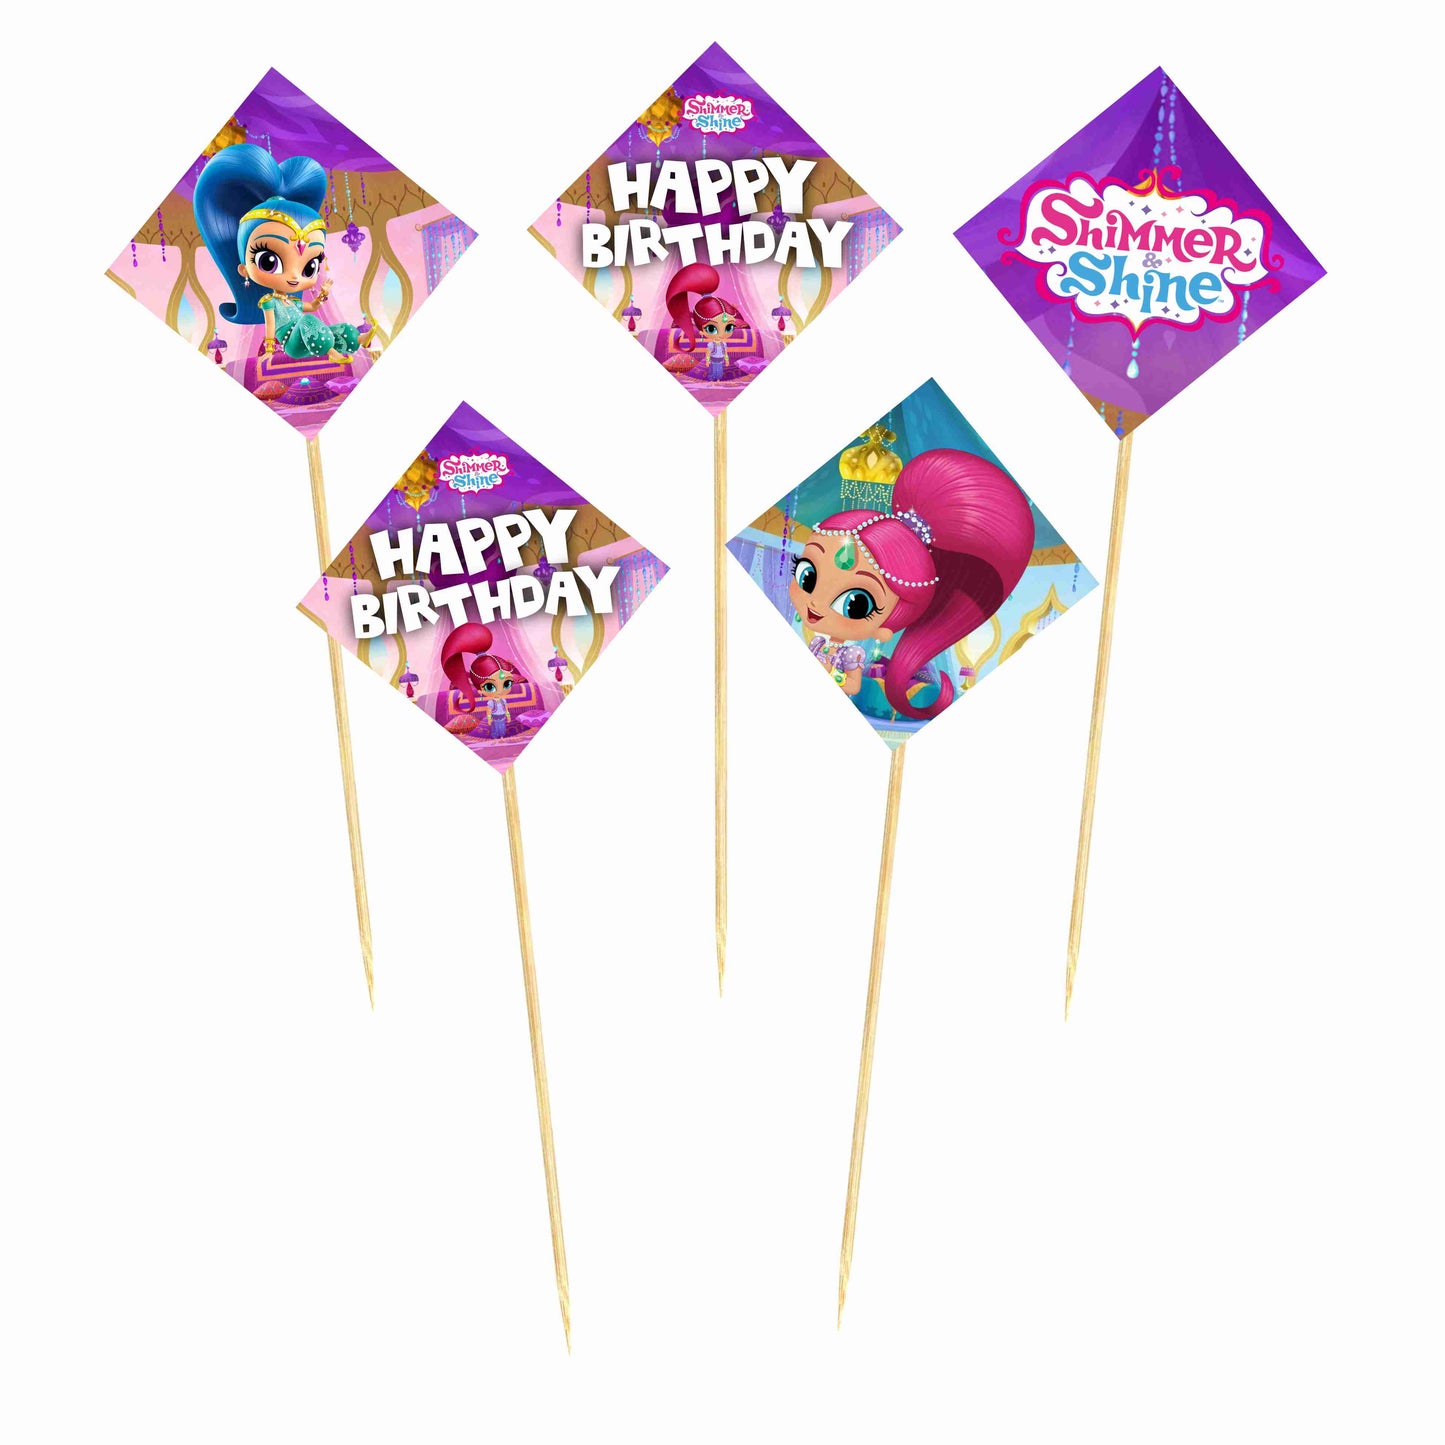 Shimmer Theme Cake Topper Pack of 10 Nos for Birthday Cake Decoration Theme Party Item For Boys Girls Adults Birthday Theme Decor